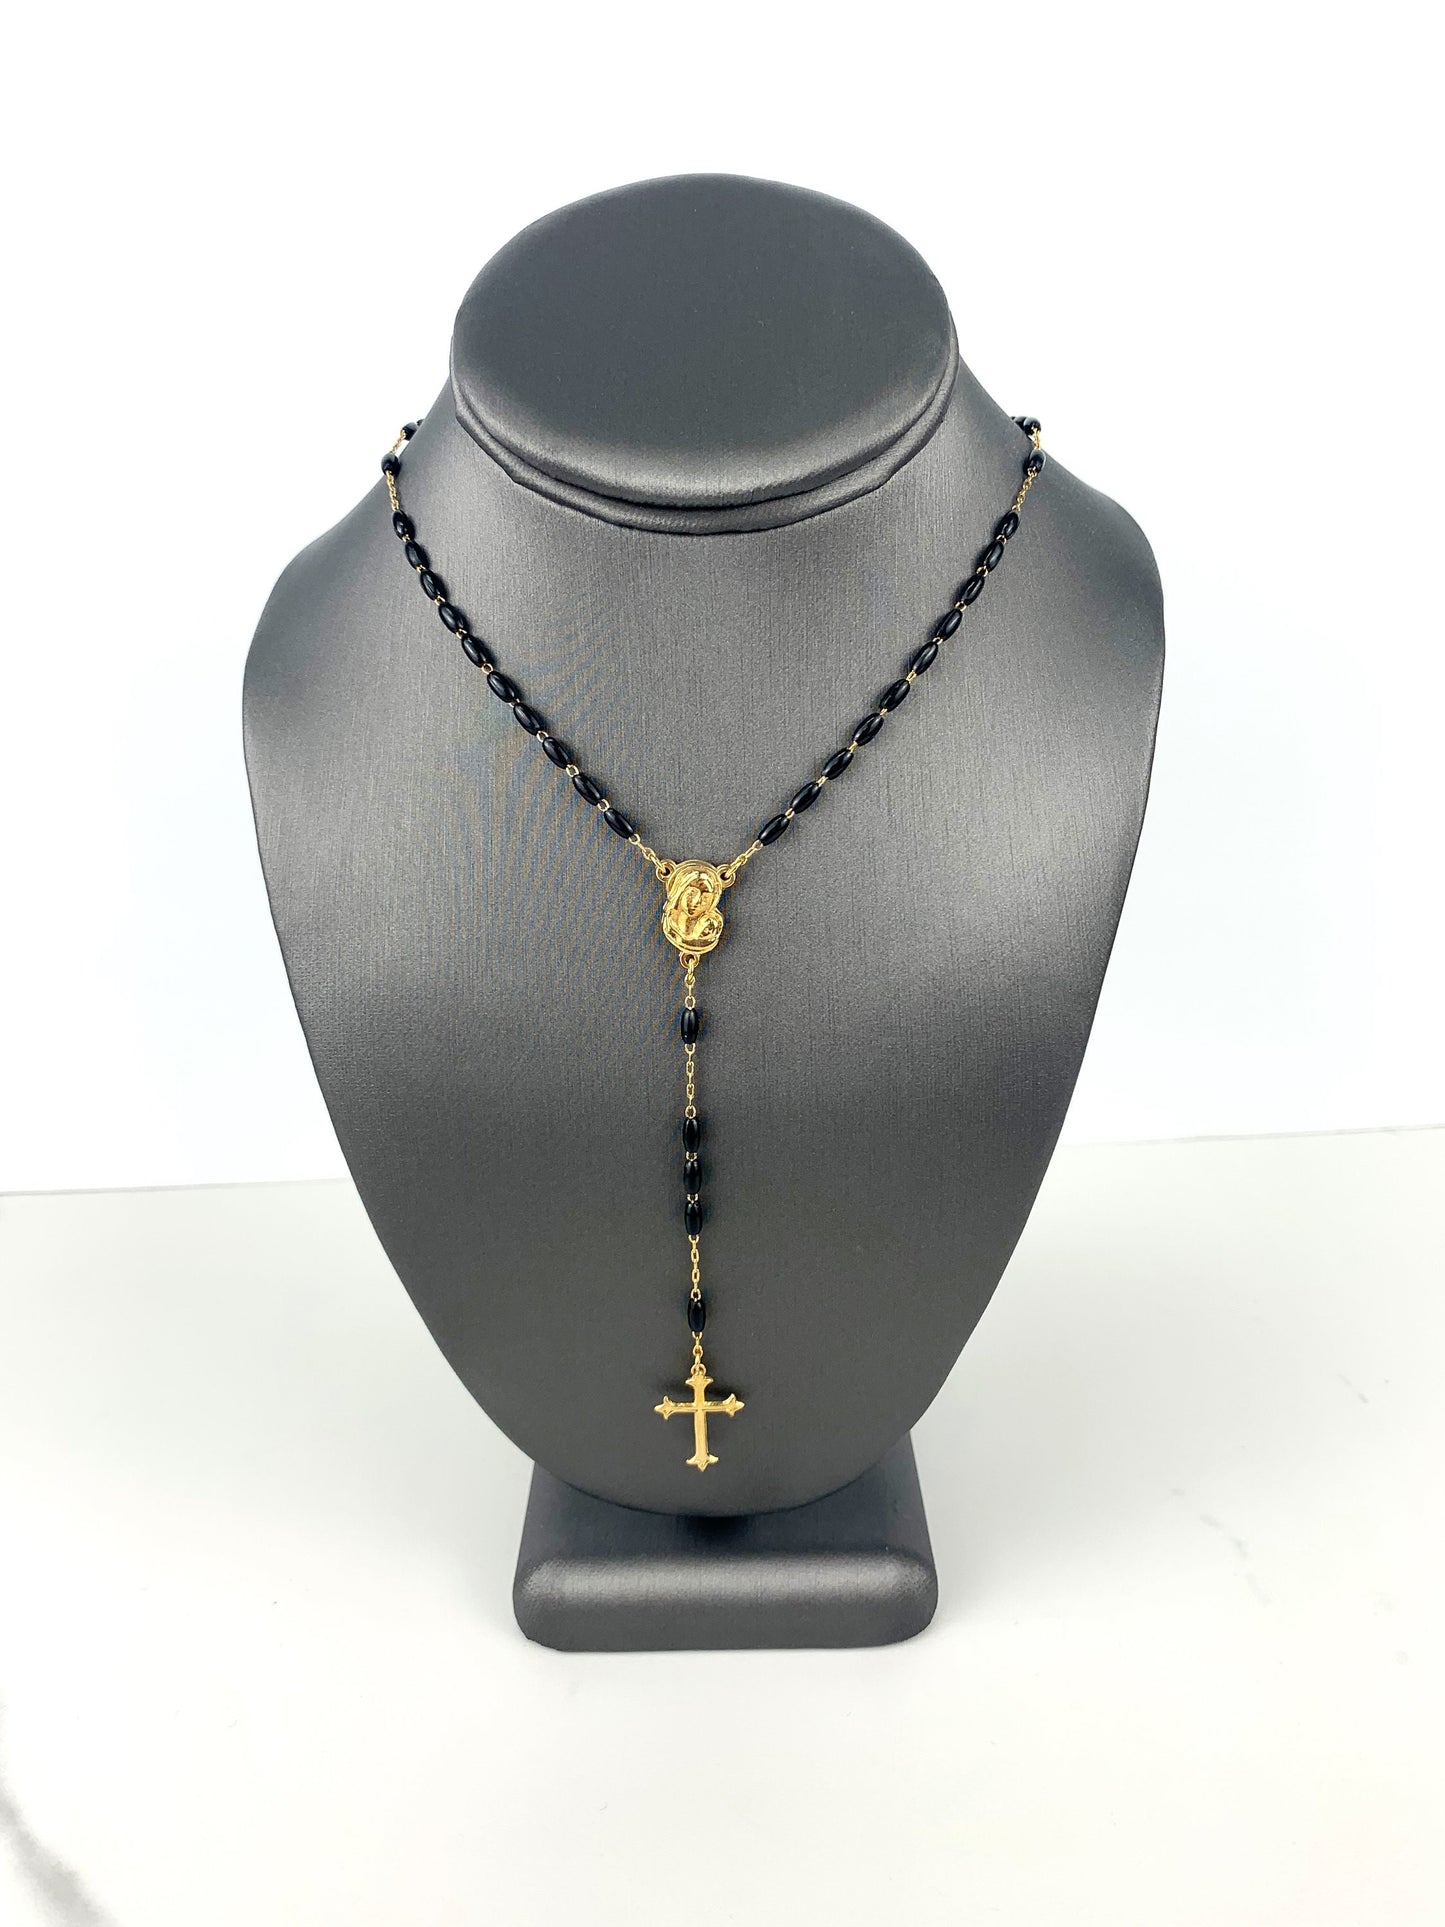 18k Gold Filled Black Beads Ave Maria Beaded Rosary Necklace, Religious Jewelry, Wholesale Jewelry Making Supplies